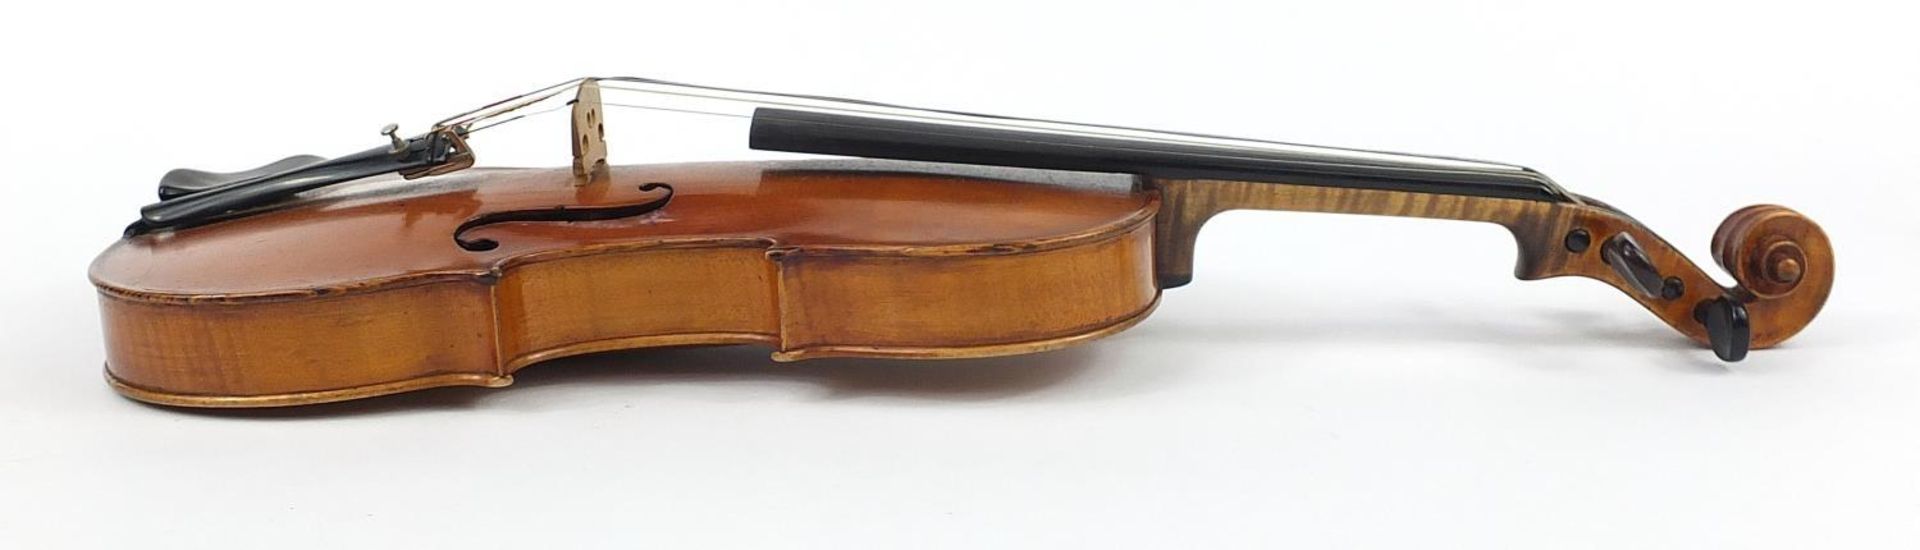 Old wooden violin bearing an Andre Castagneri paper label, the violin back 14 inches in length - Image 4 of 10